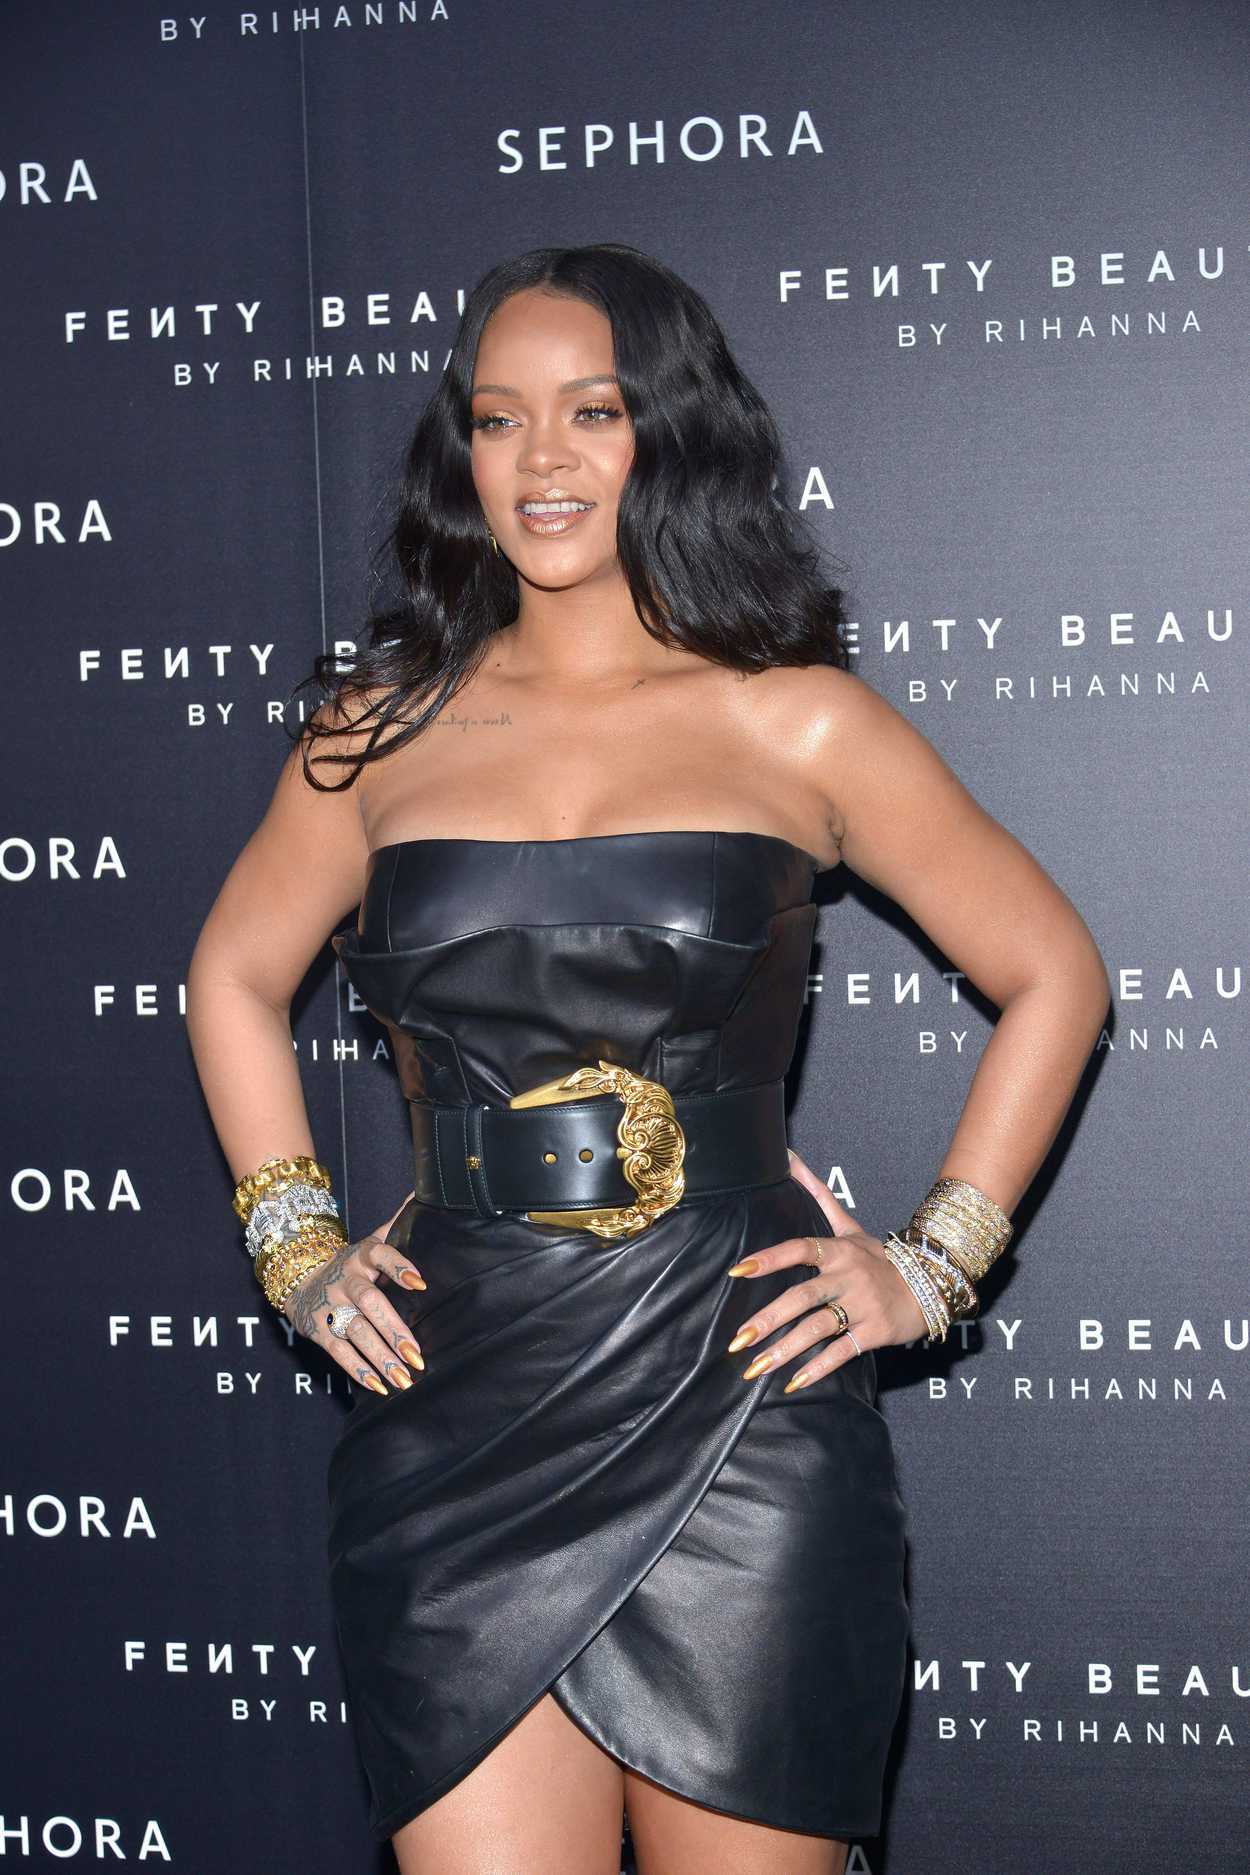 Rihanna At The Fenty Beauty Line By Sephora Launch In Milan 04 05 2018